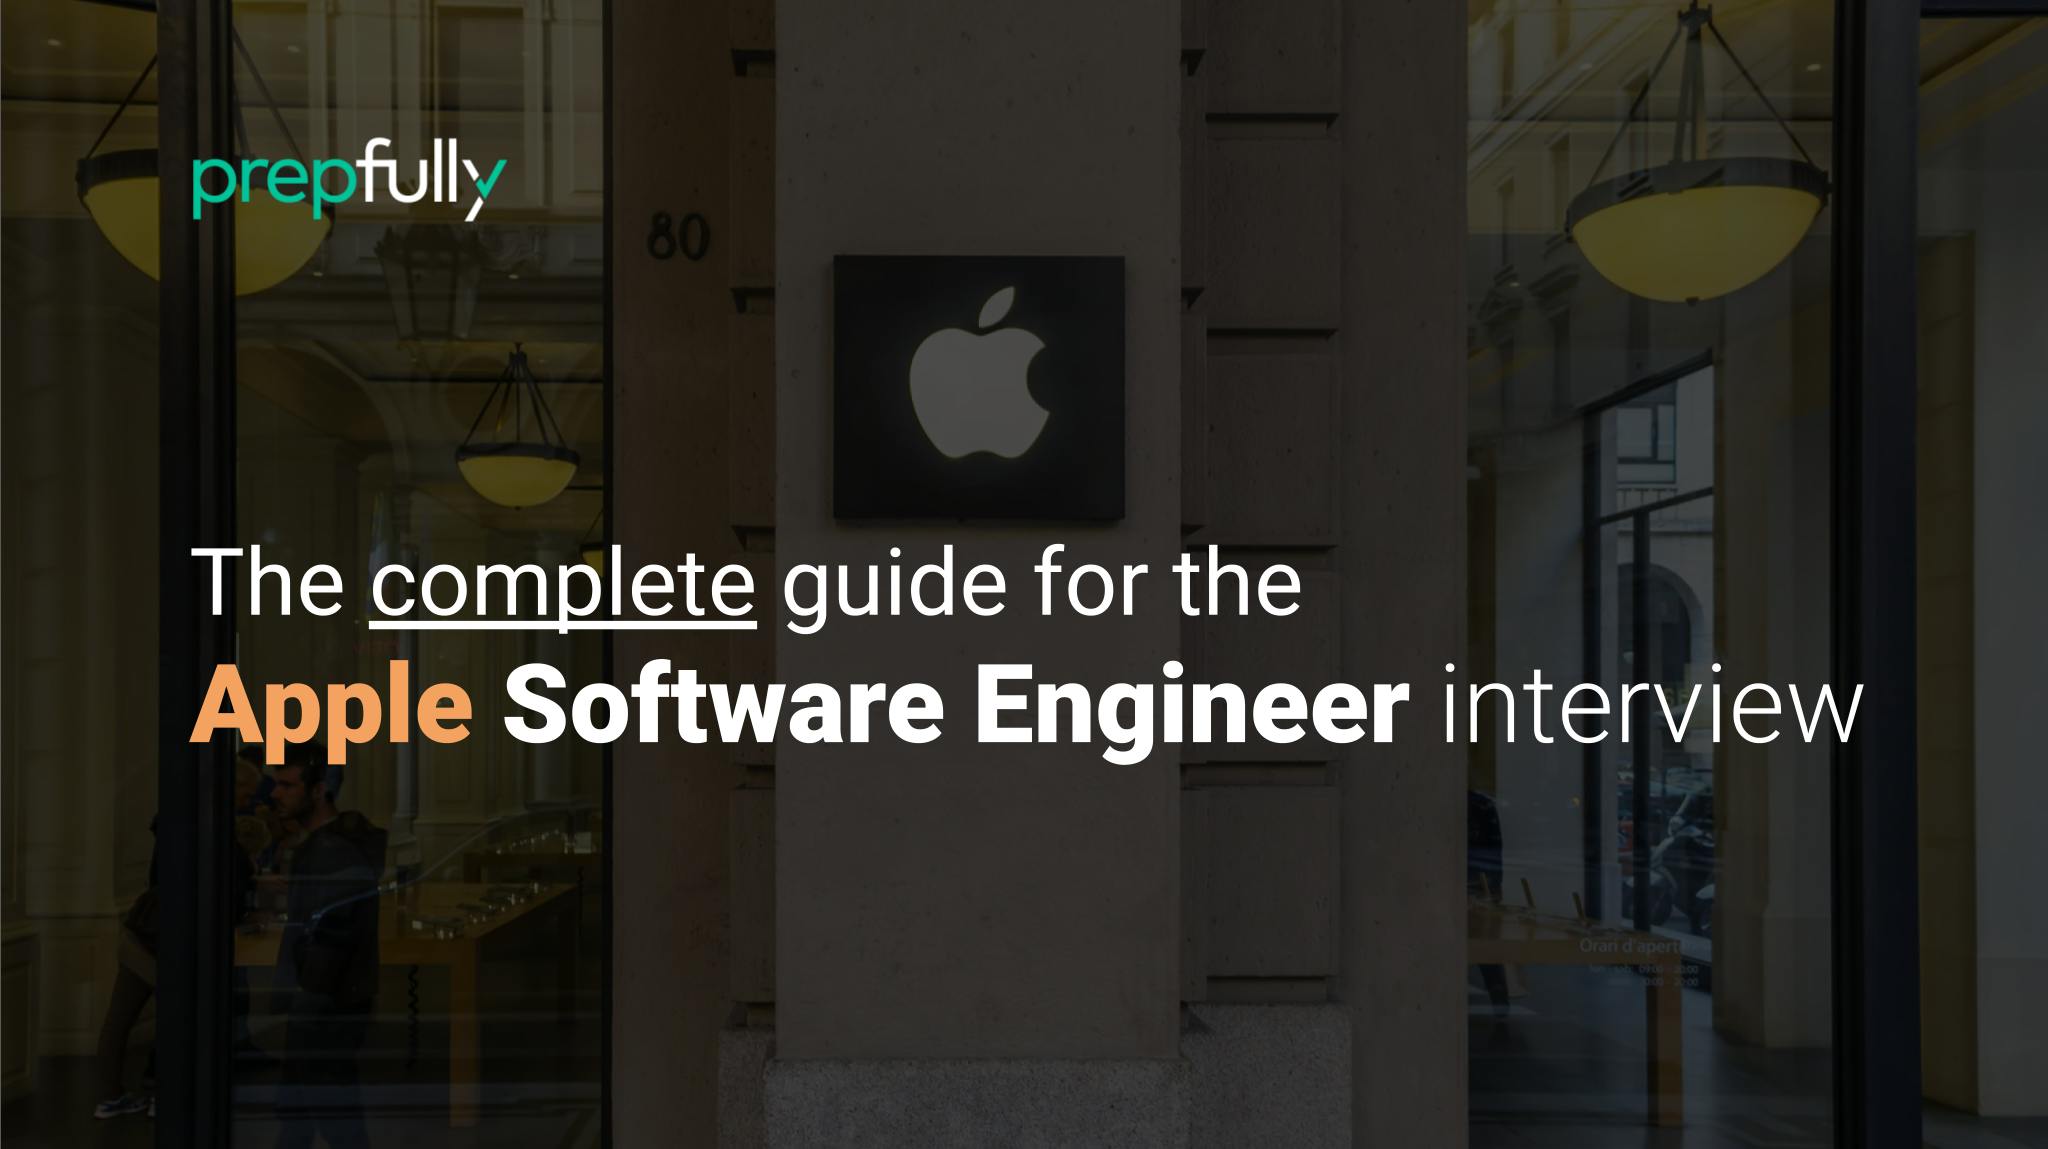 Interview guide for Apple Software Engineer